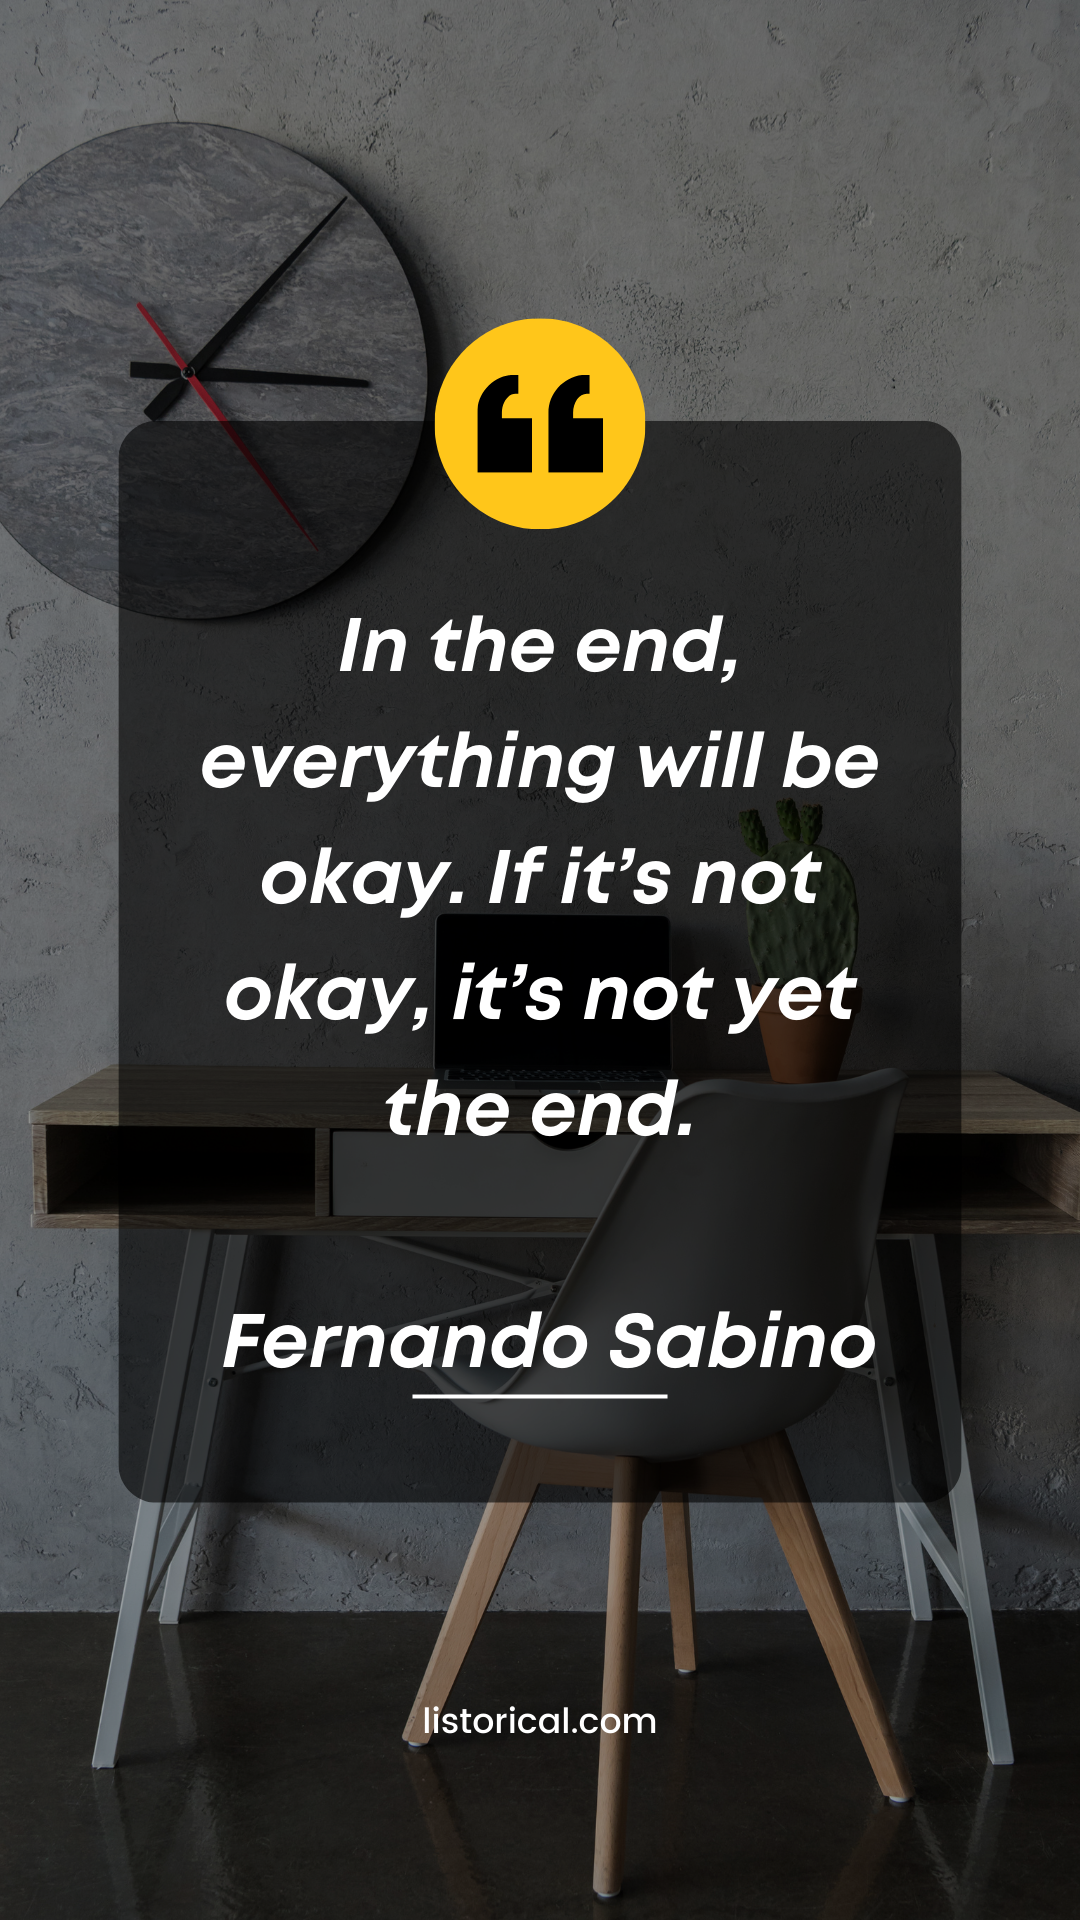 In the end, everything will be okay. If it’s not okay, it’s not yet the end. Fernando Sabino